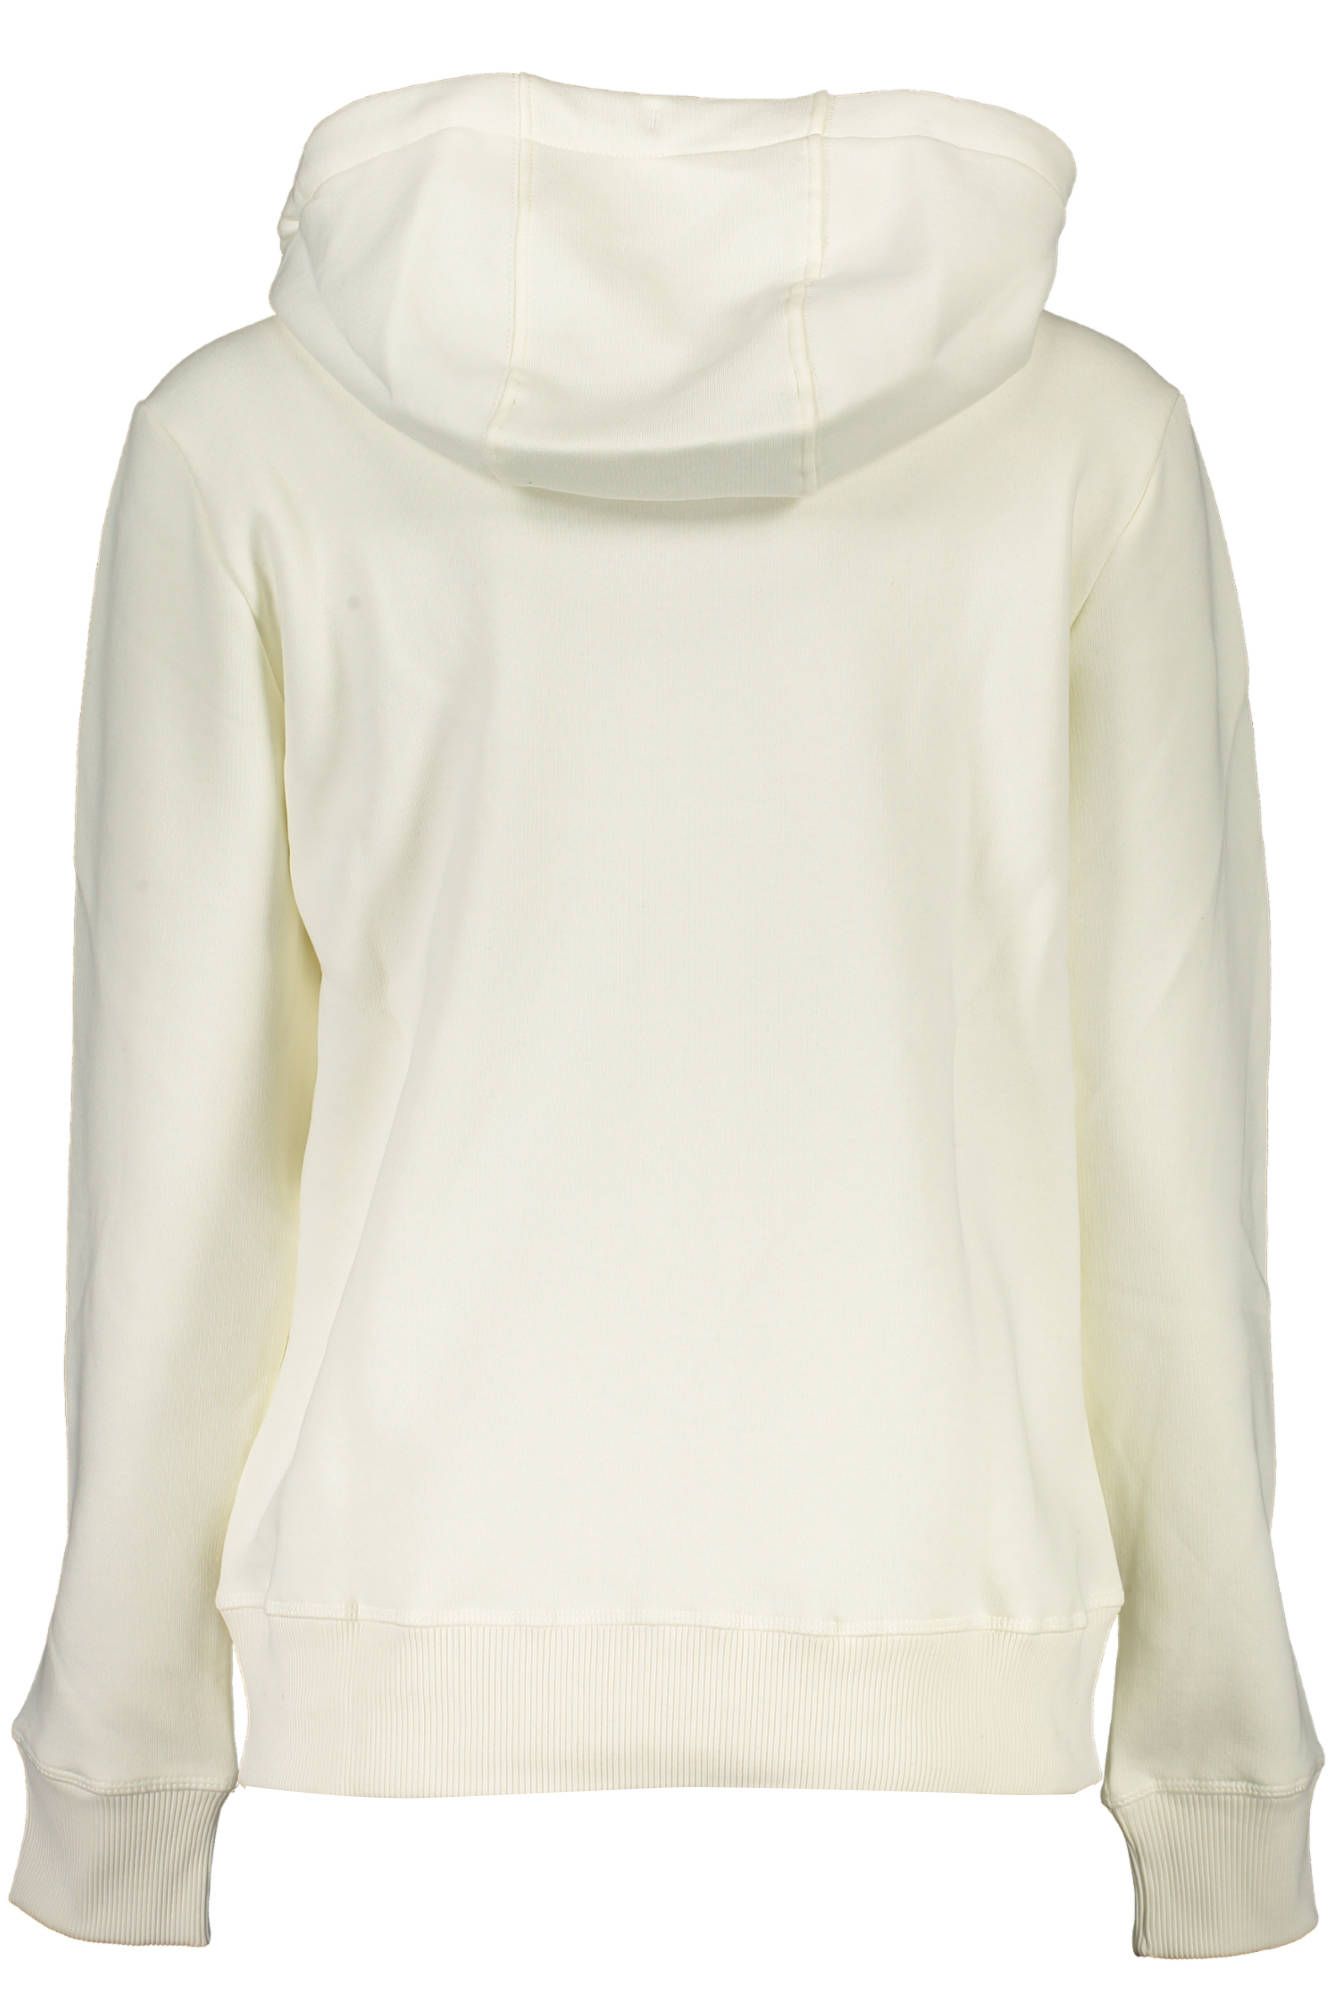 Chic White Hooded Sweatshirt with Unique Print